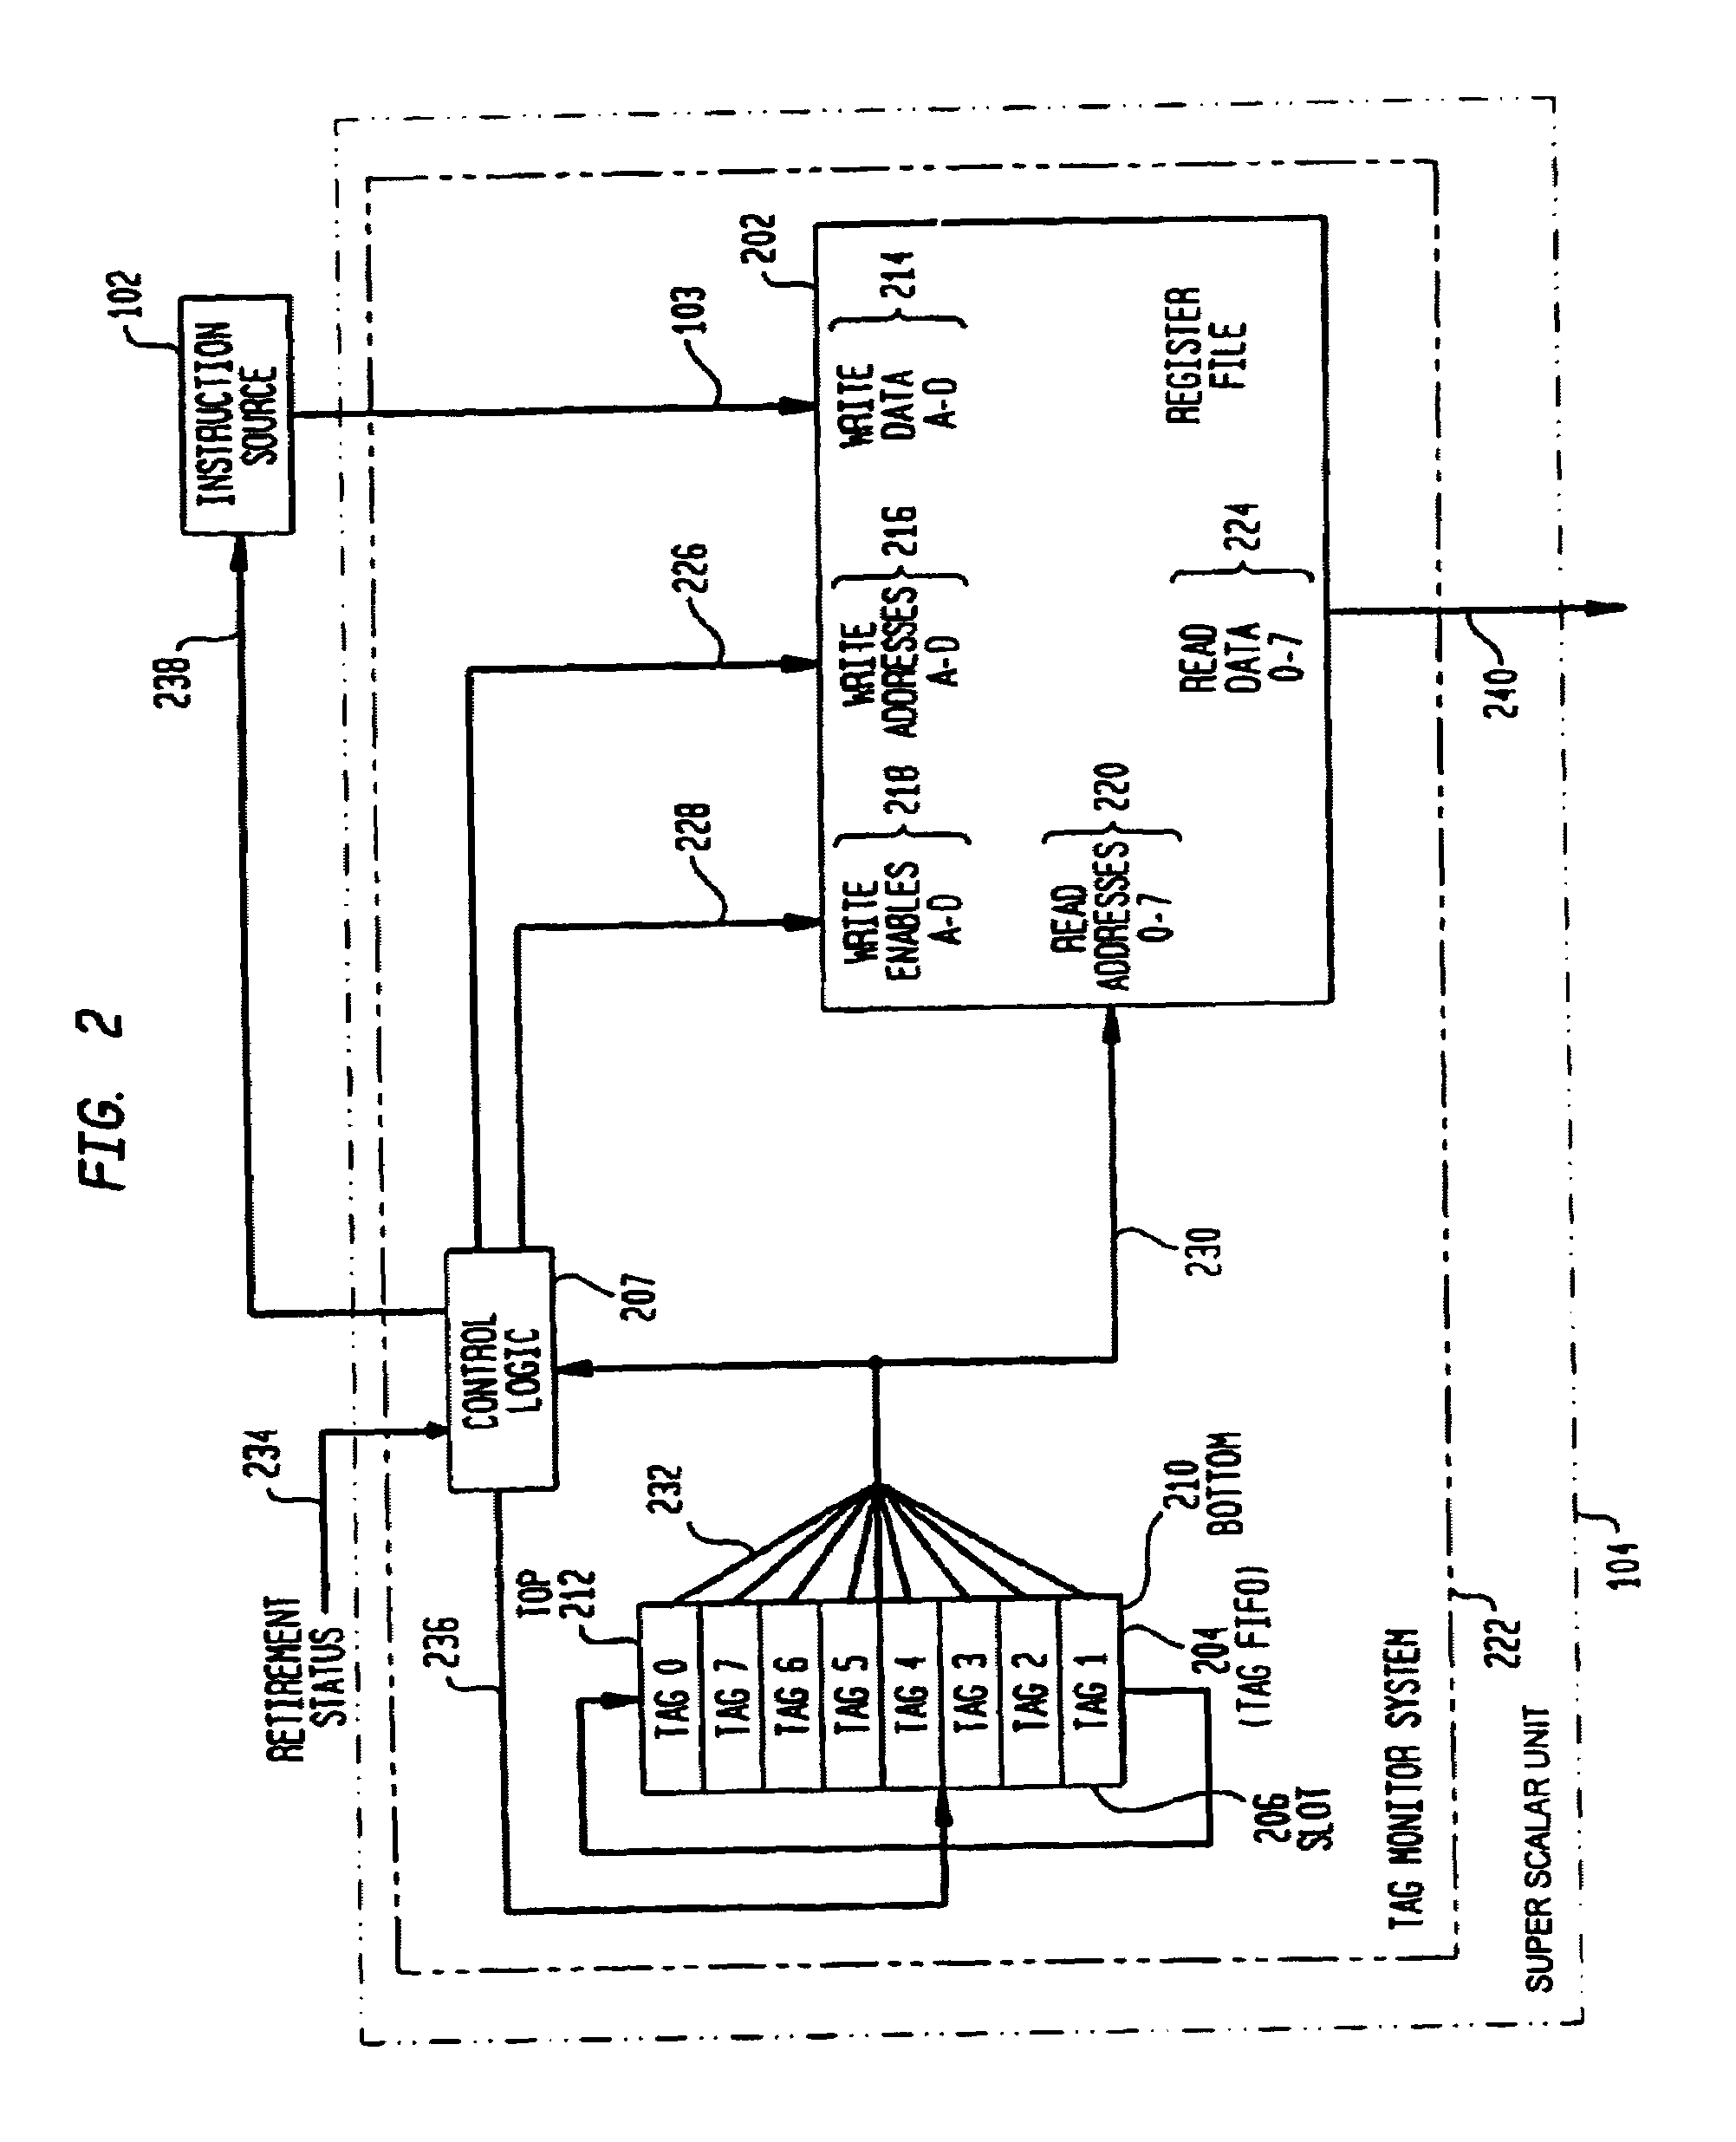 System and method for assigning tags to control instruction processing in a superscalar processor